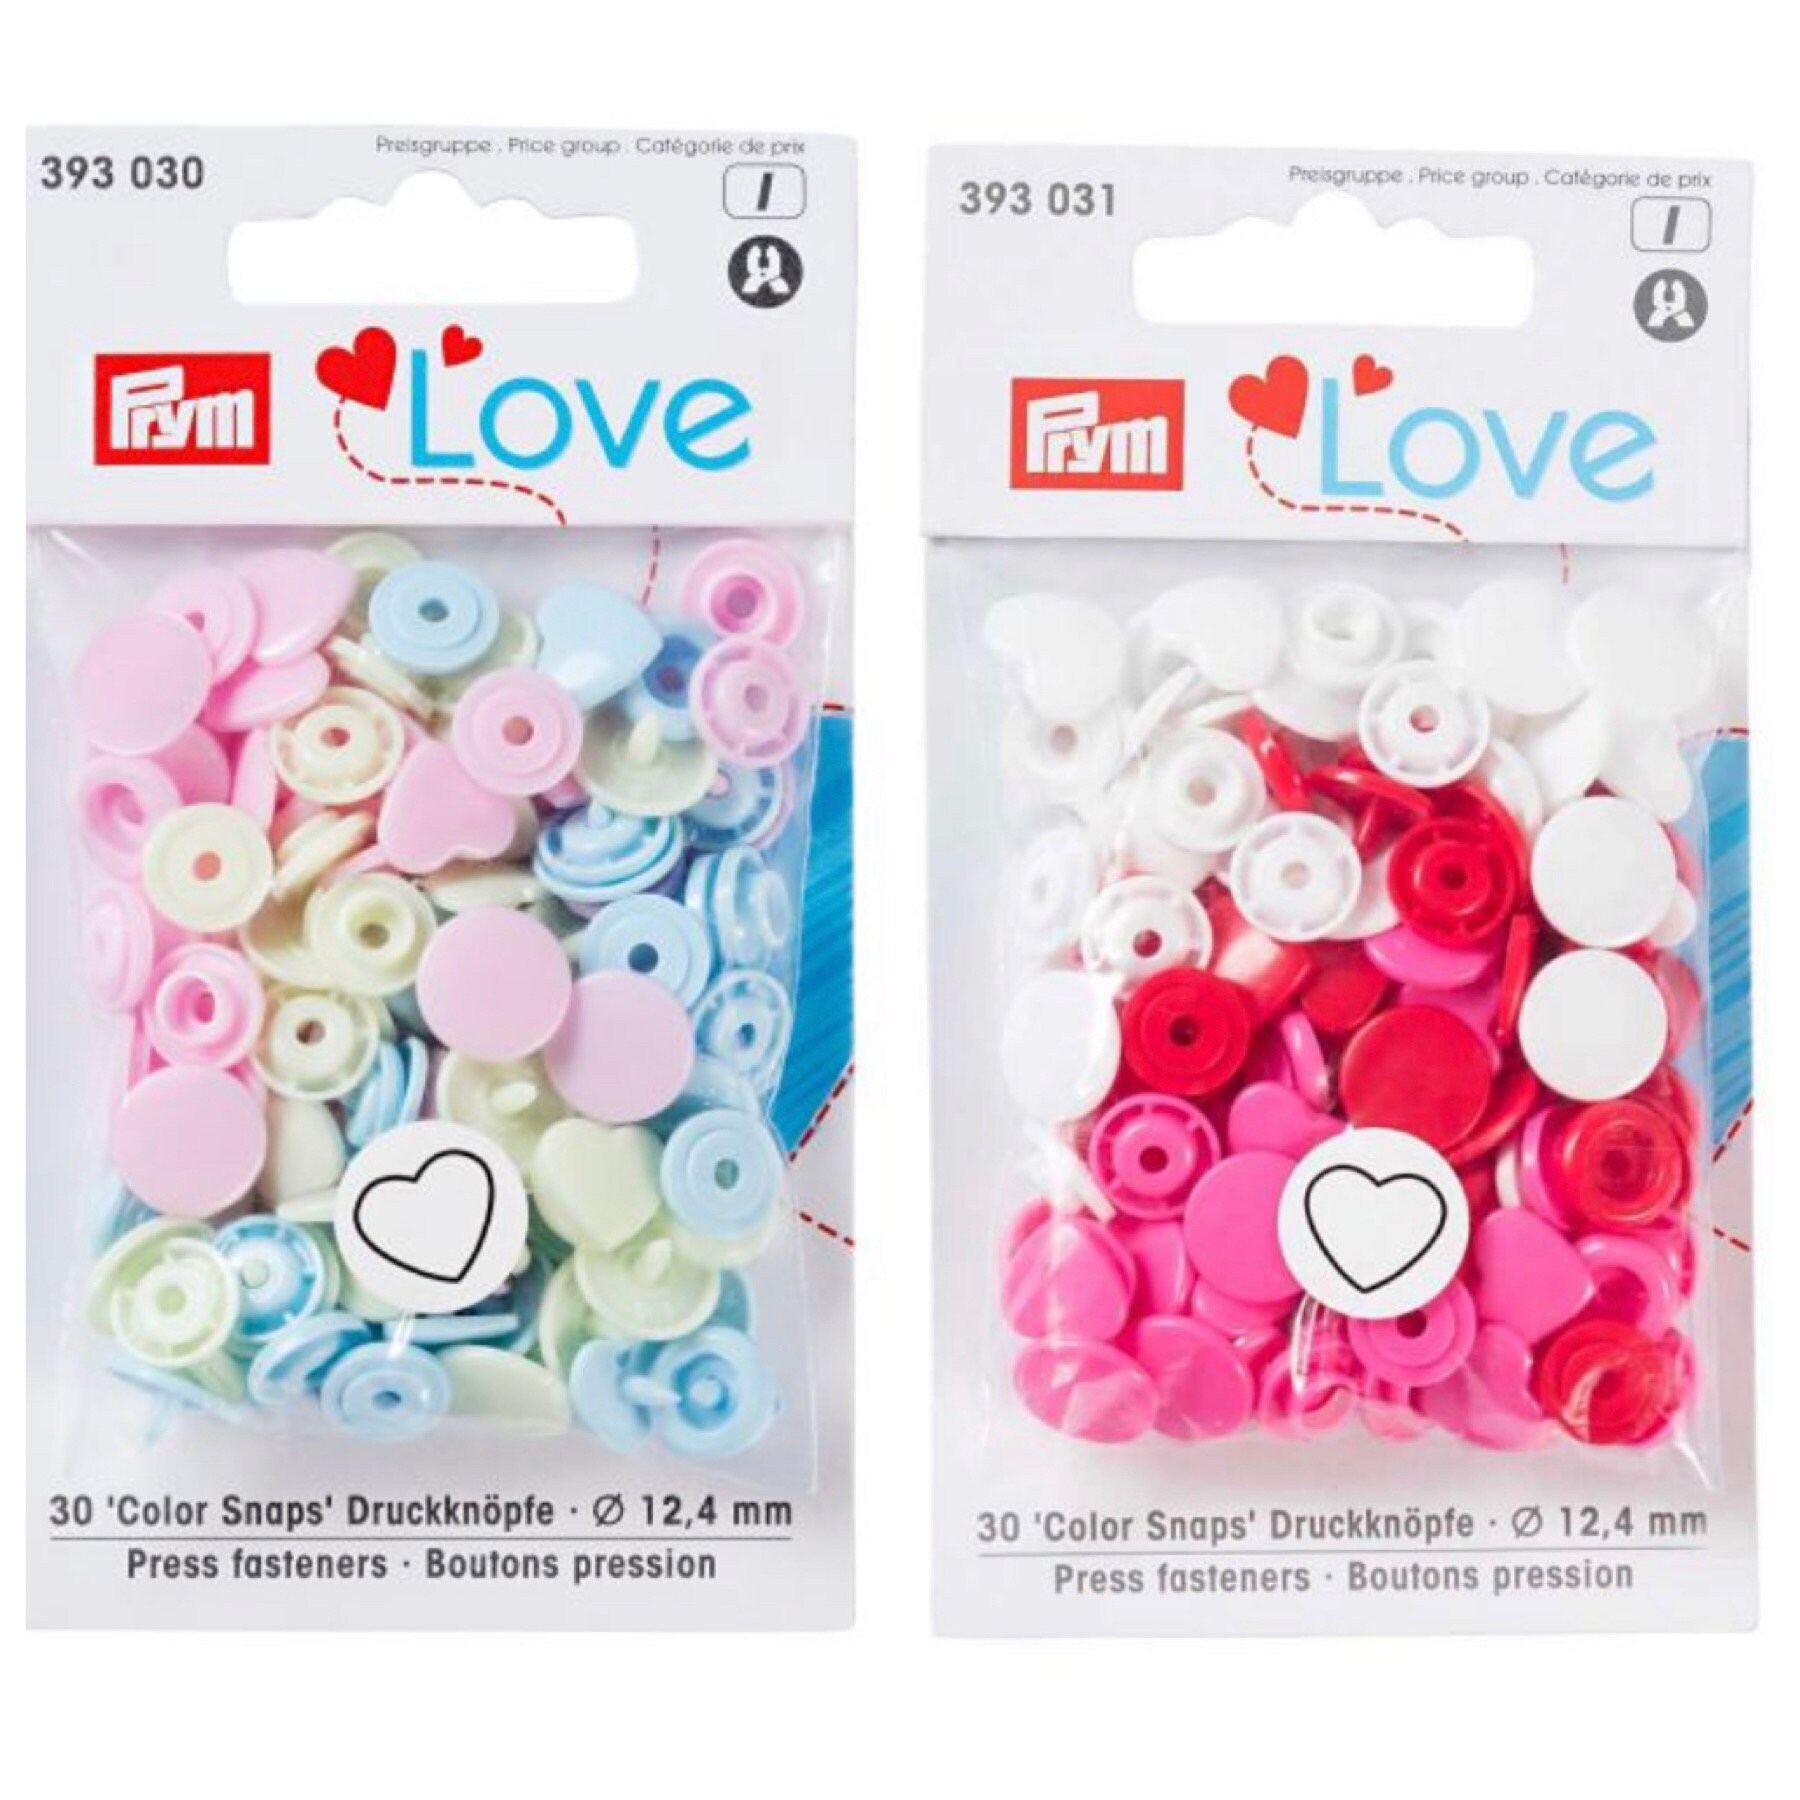 Heart KAM Snaps T20, Decorative Plastic Snap Fasteners, Decorative Baby  Clothes Snaps, Heart Snap Buttons for Diapers, Bibs, 50 or 30 Sets 